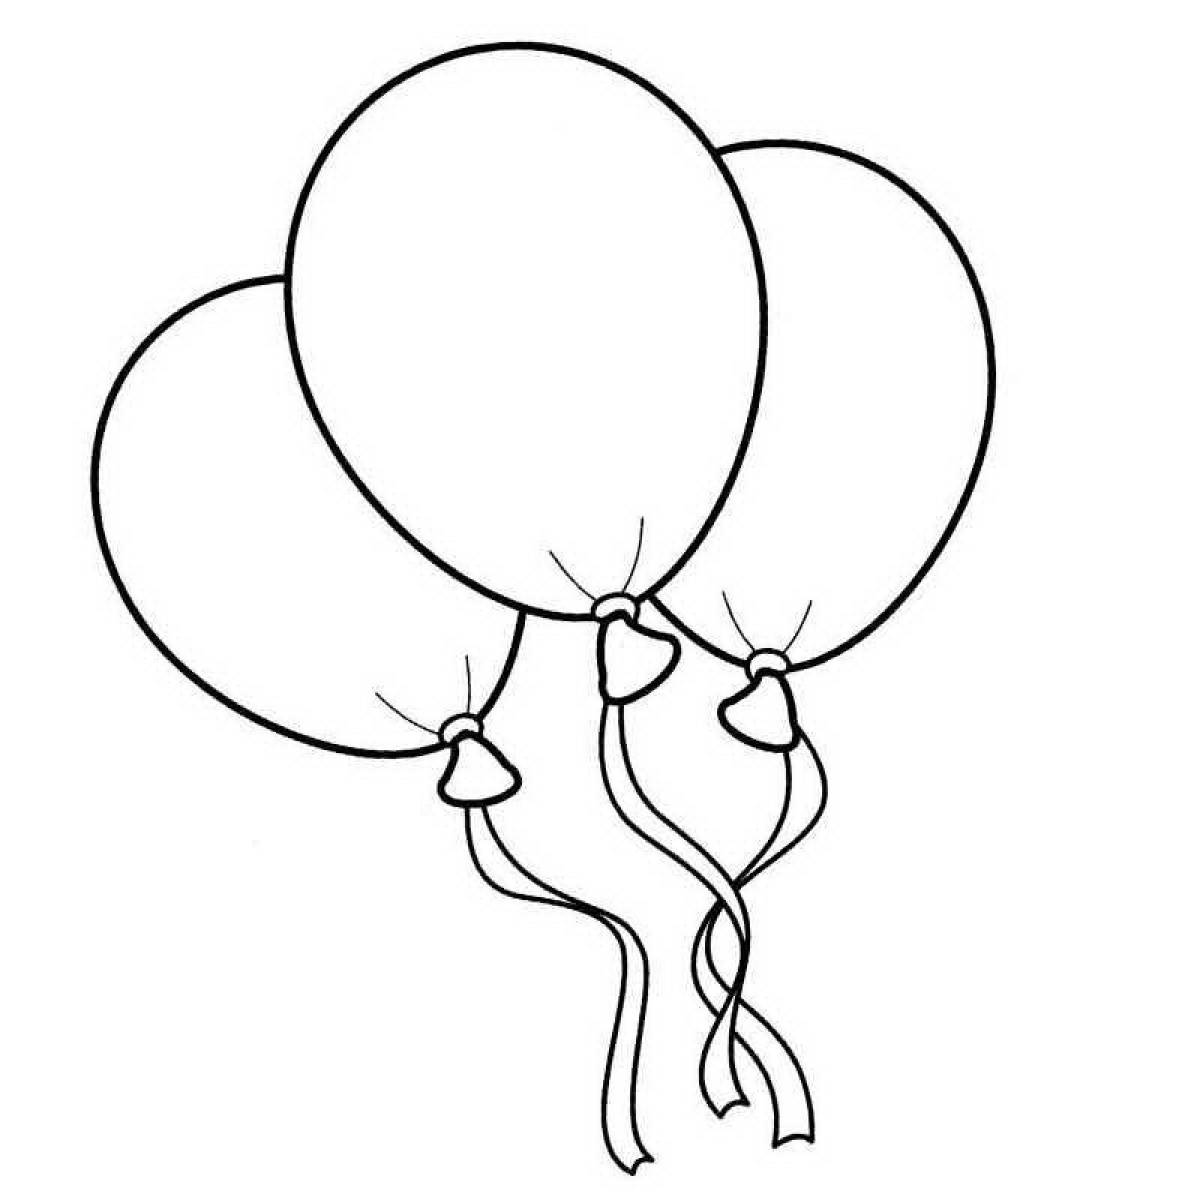 Playful coloring book with a ball for children